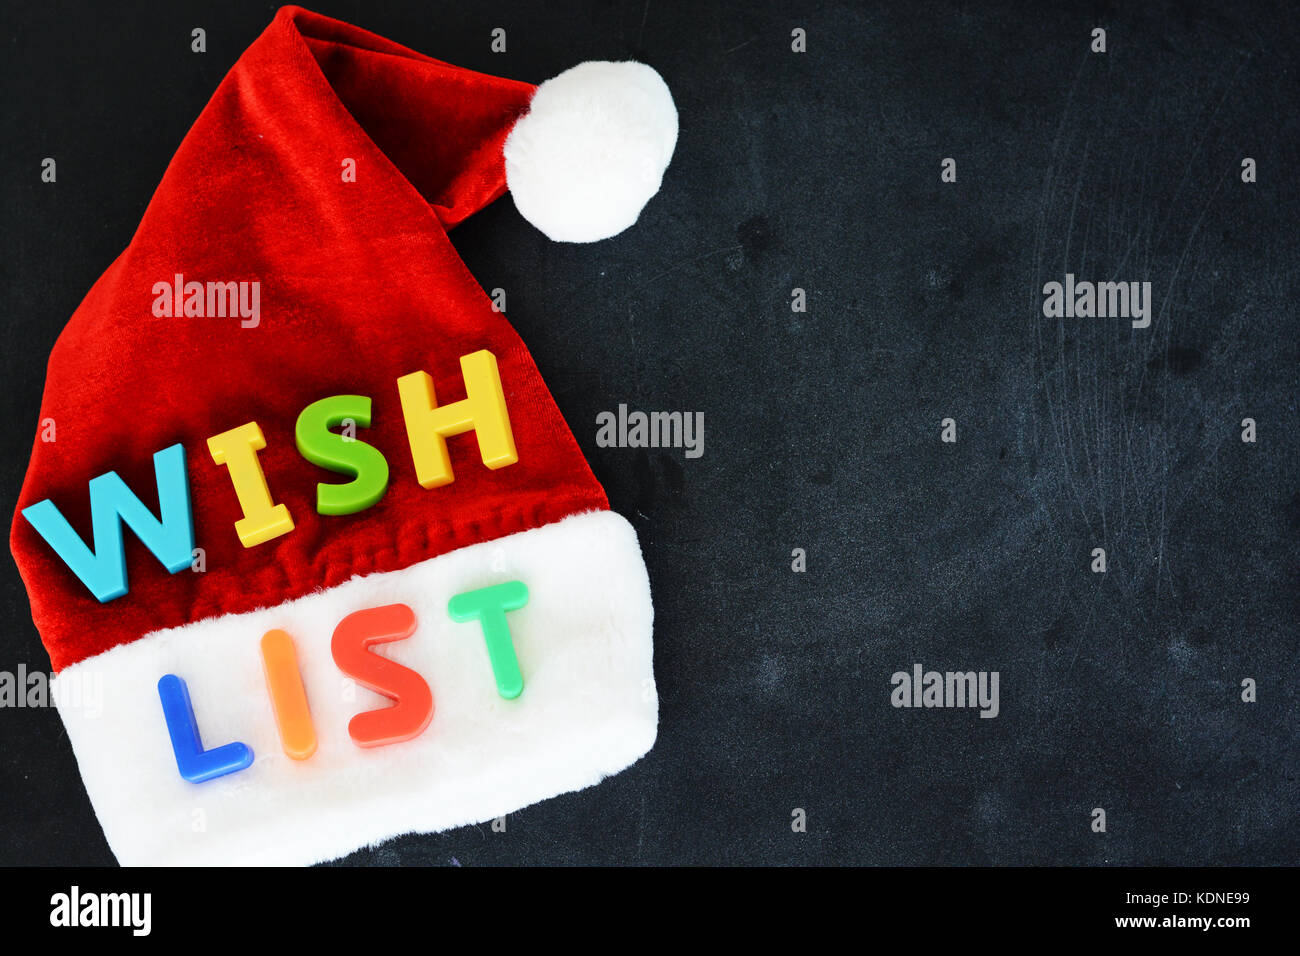 Santa Claus wish list concept with colorful text on Santa’s red hat Stock Photo